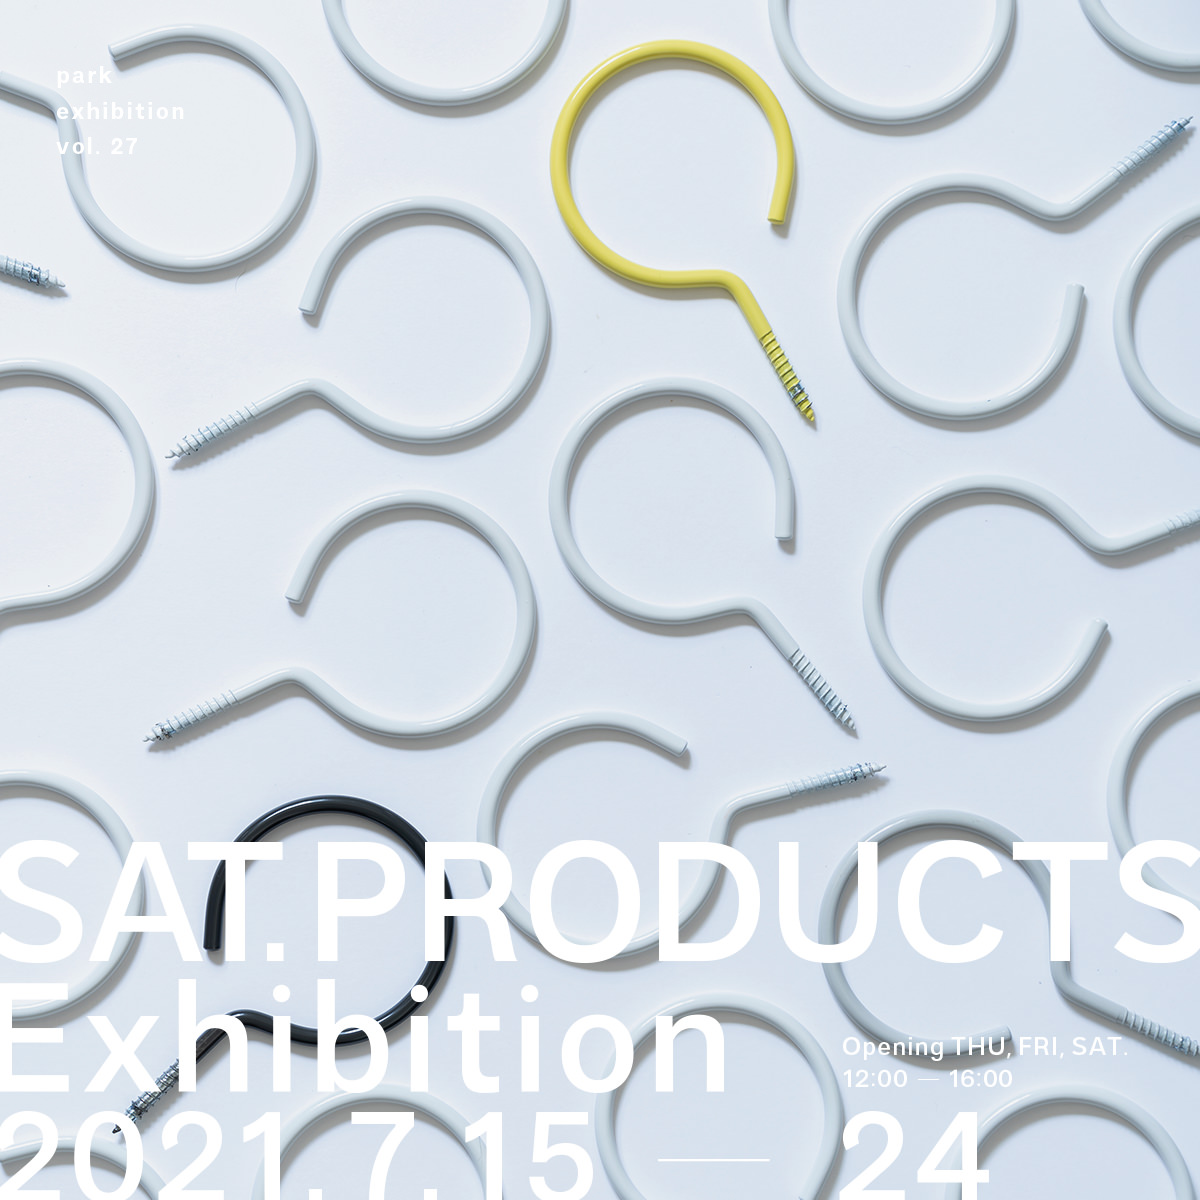 SAT.PRODUCTS Exhibition開催のお知らせ